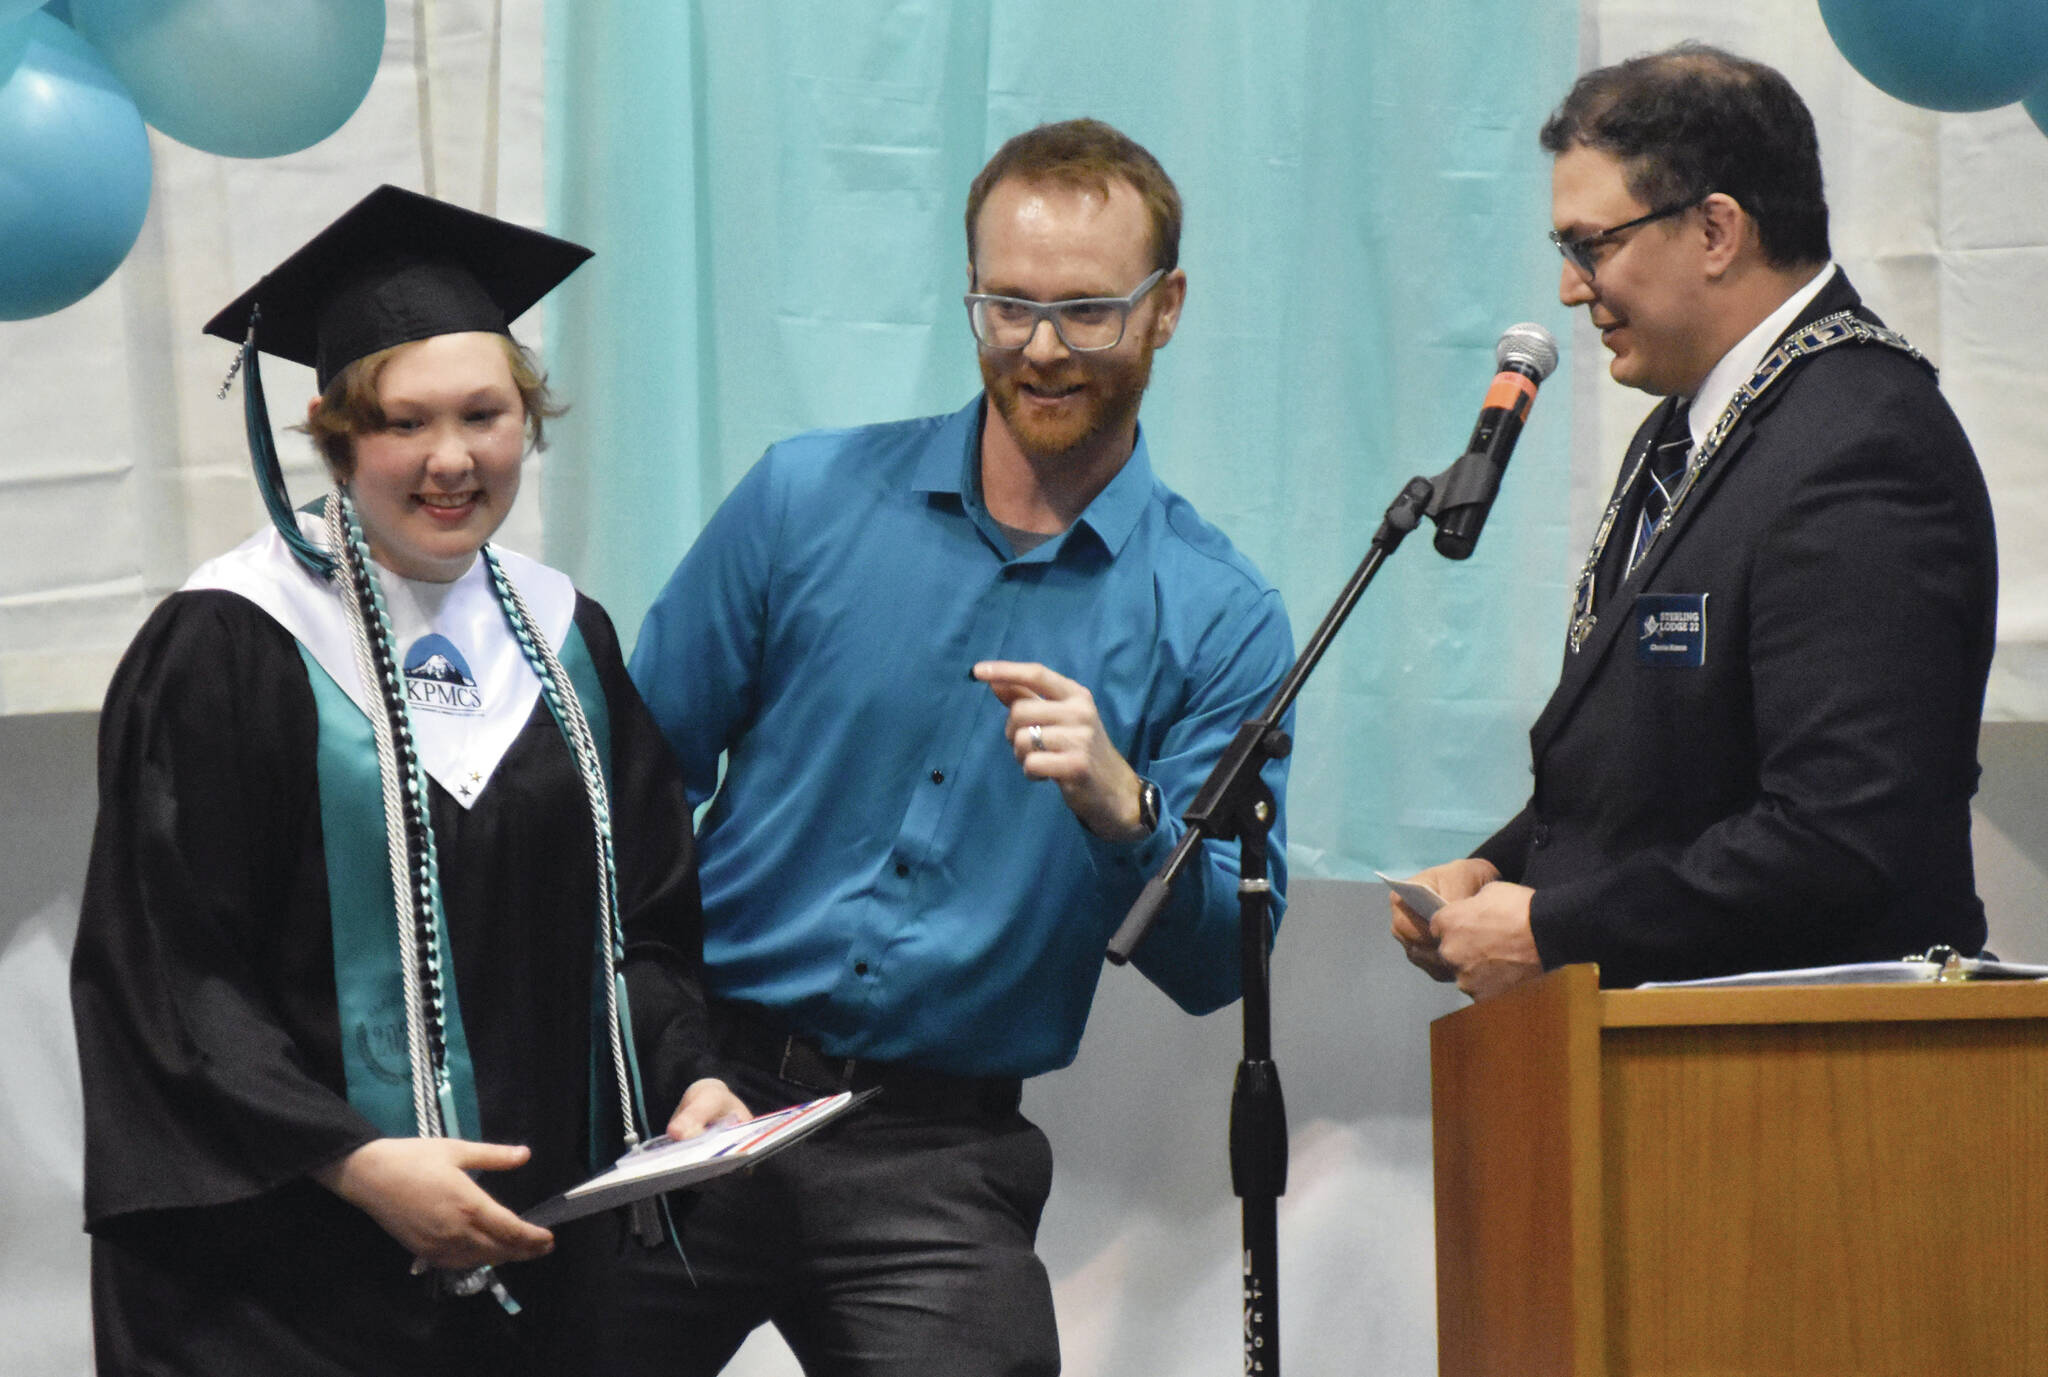 Hannah Crabtree accepts the Masonic Lodge Student of the Year award from Charles Karron (right) of Sterling Masonic Lodge #22 on Wednesday. Shea Nash, principal of River City Acadmey, orientates the two for photos. (Photo by Jeff Helminiak/Peninsula Clarion)